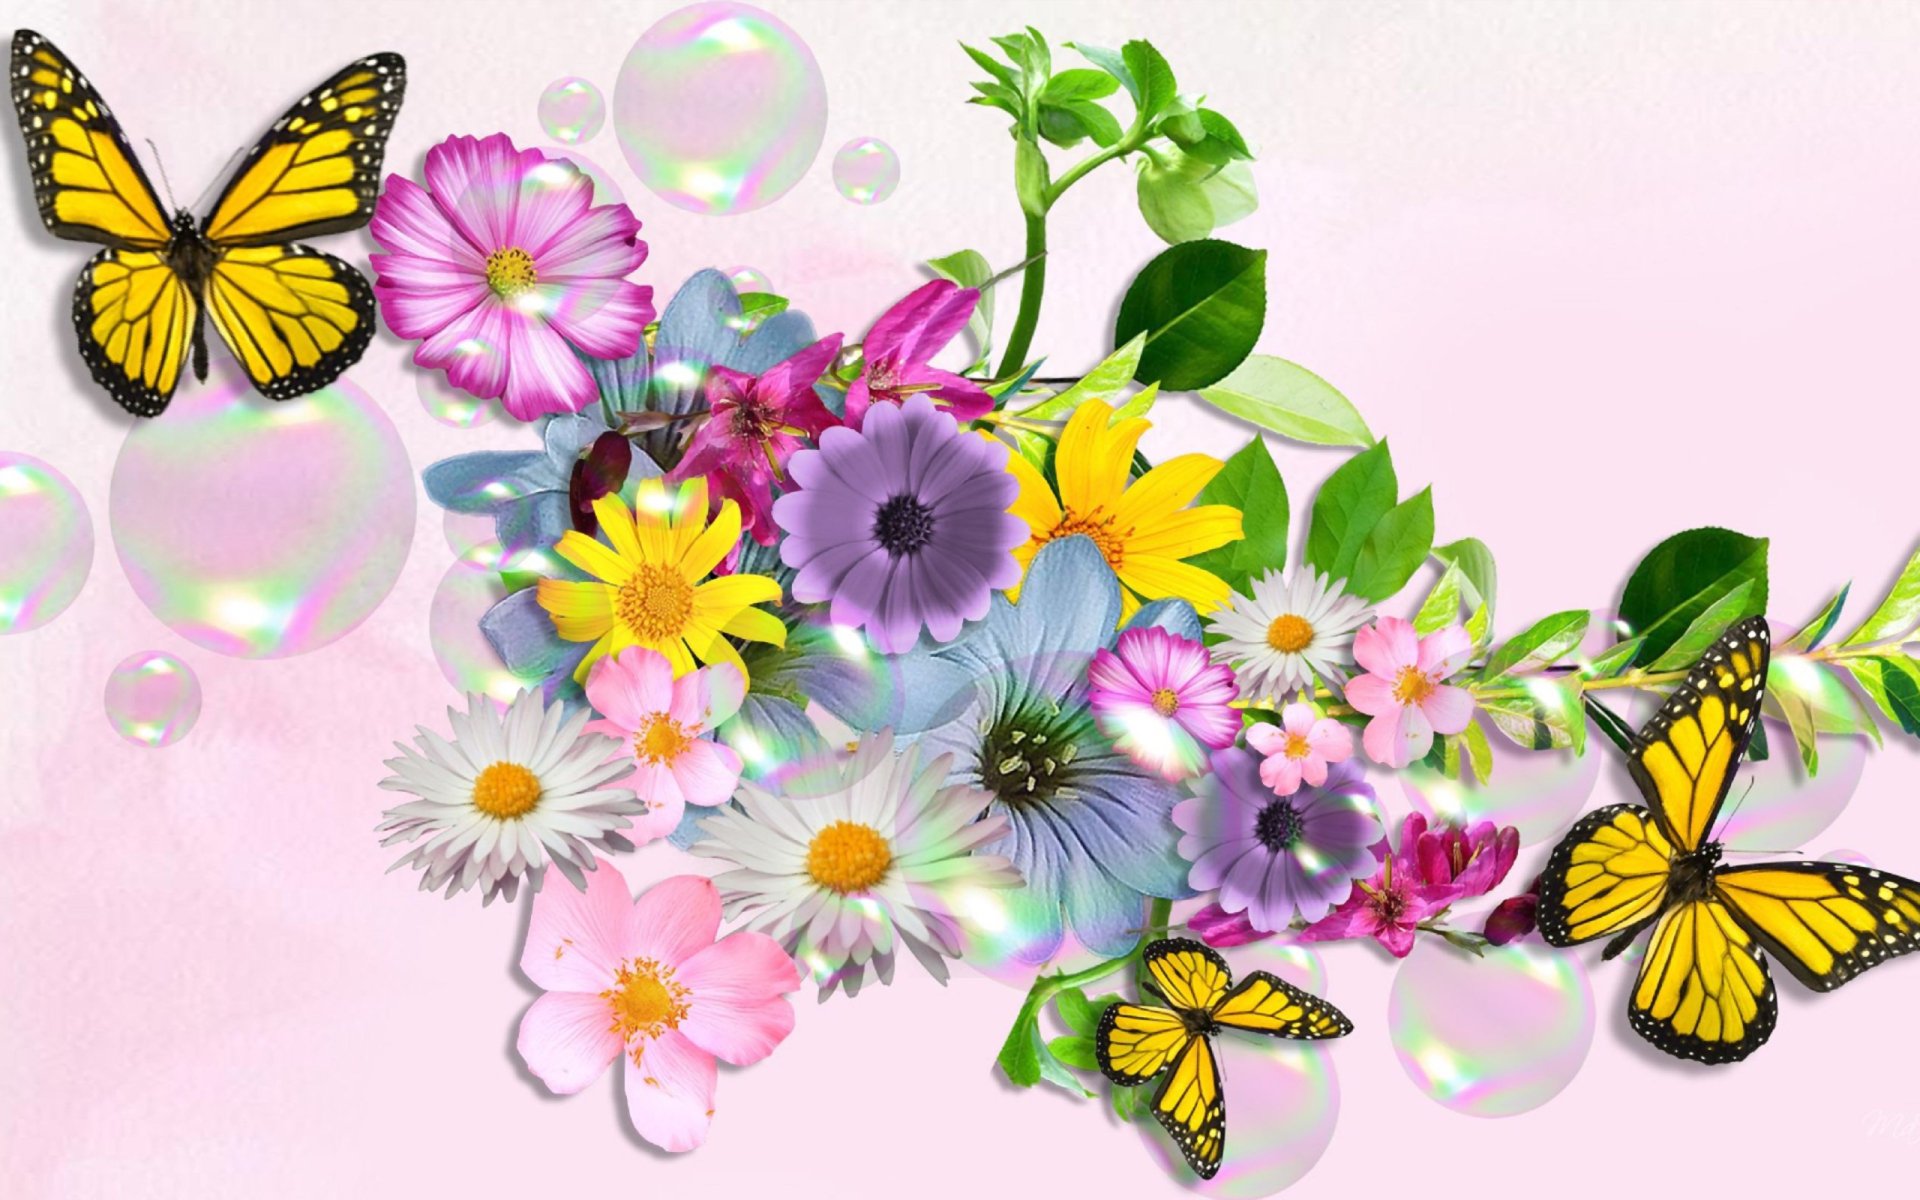 Download Flowers and Butterflies HD Wallpaper | Background Image ...